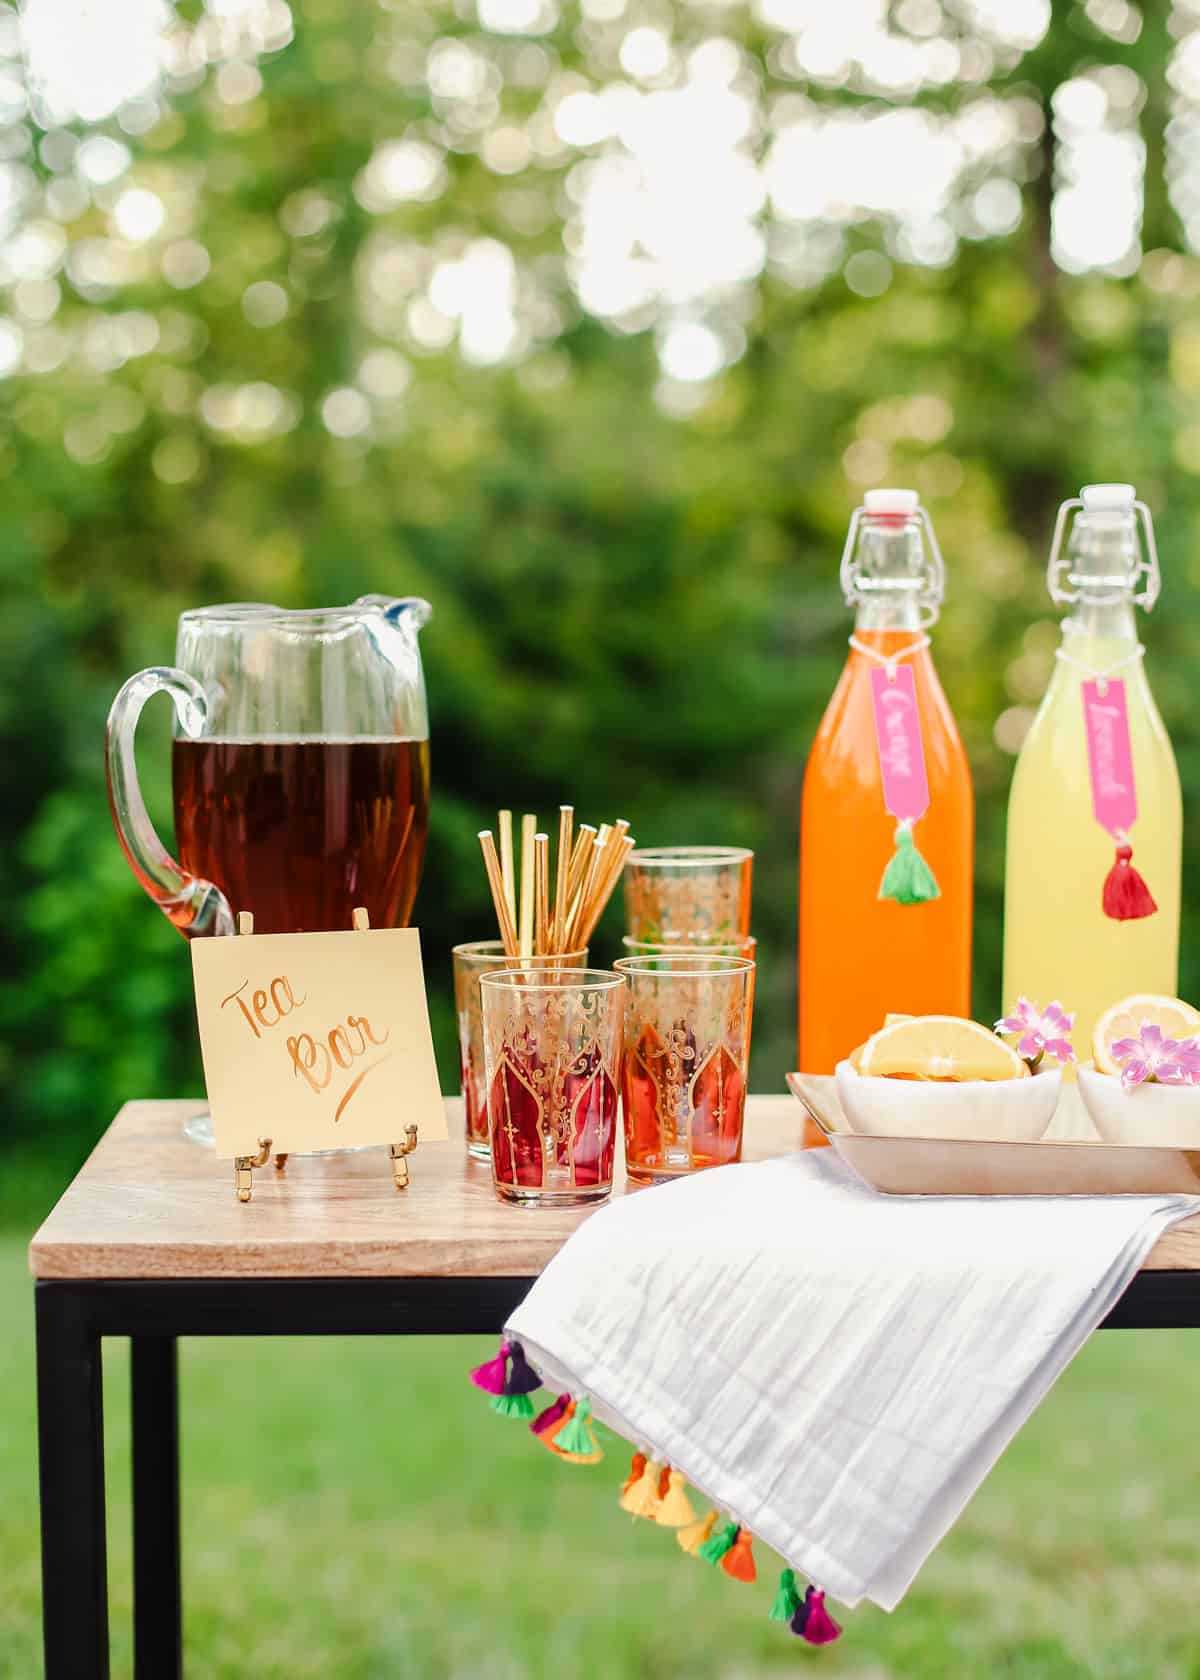 Iced Tea Bar Ideas for a Party - Celebrations at Home